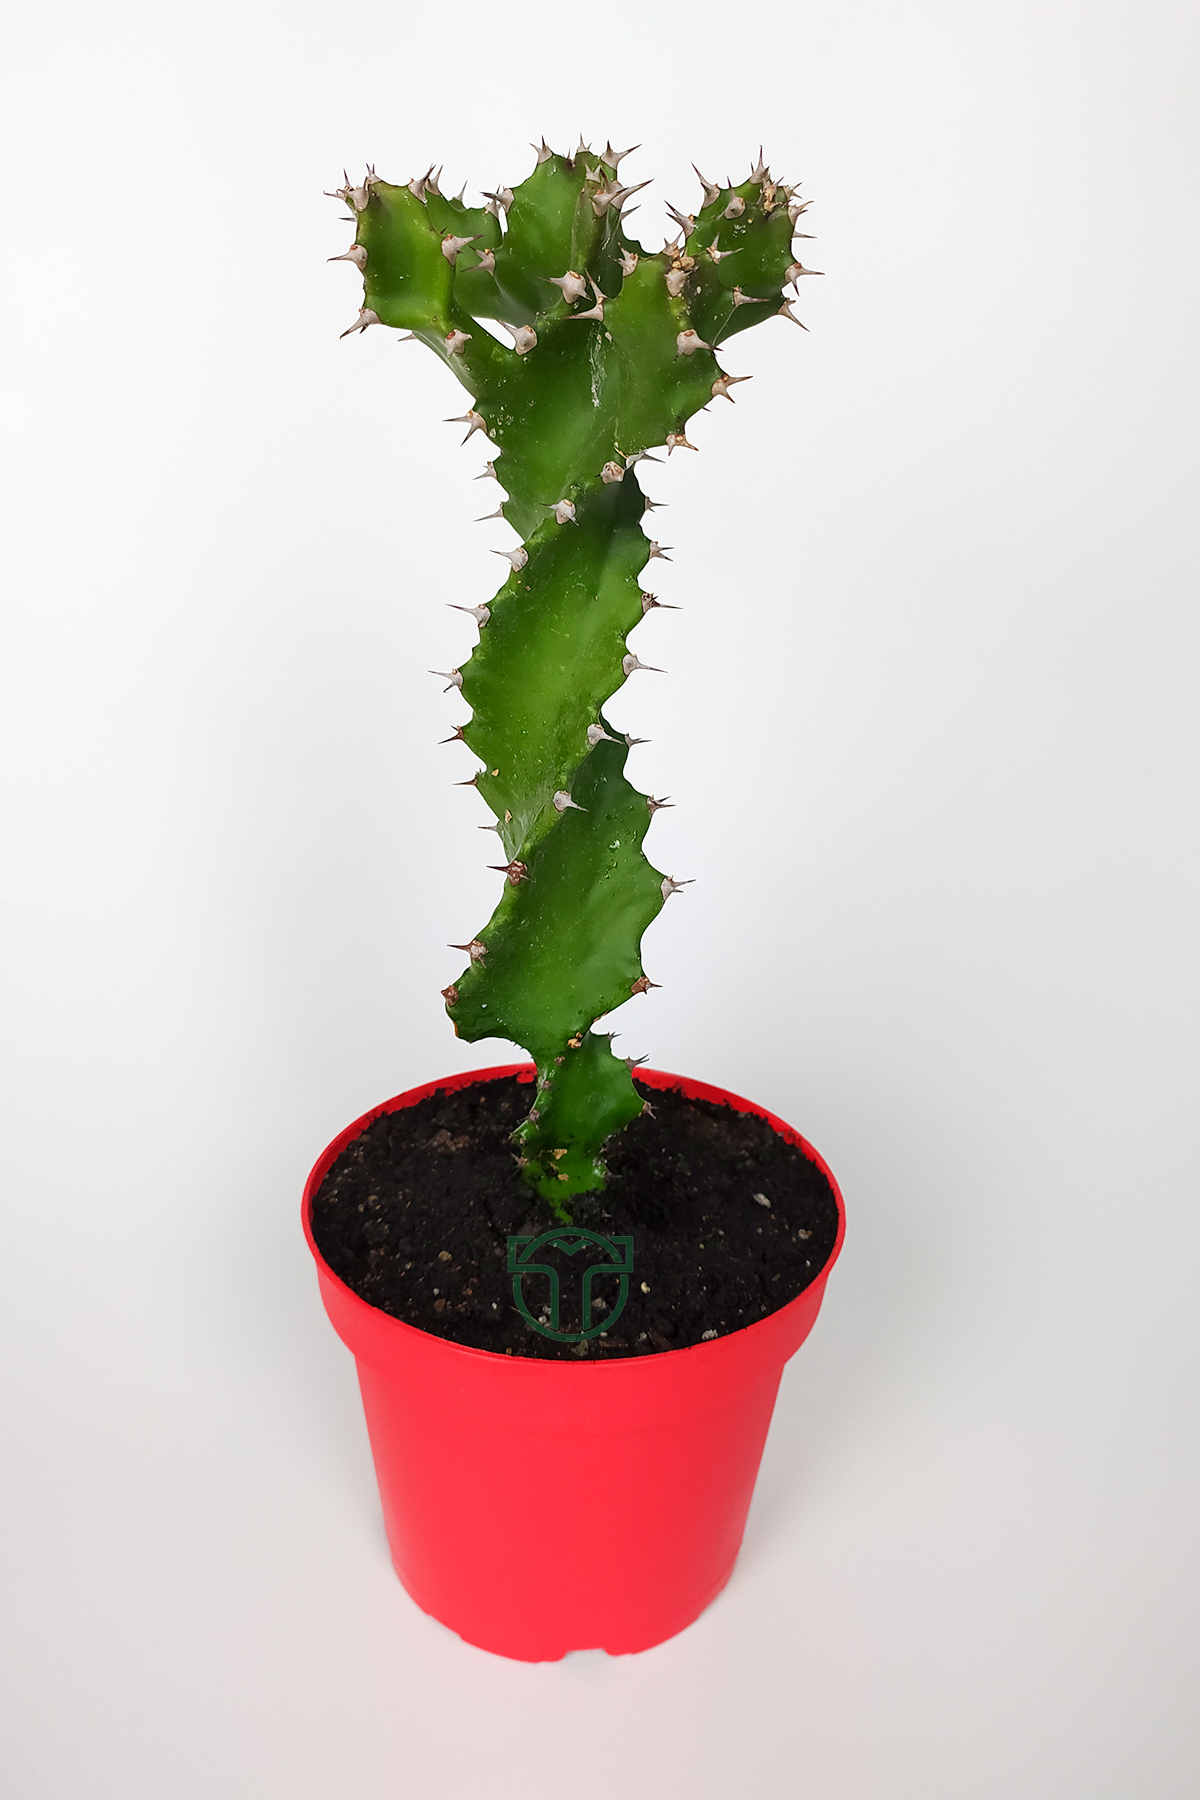 Spiral Cactus Euphorbia Tortilis Twisted Rare Species 20 cm Tall 12 cm in Red Pot